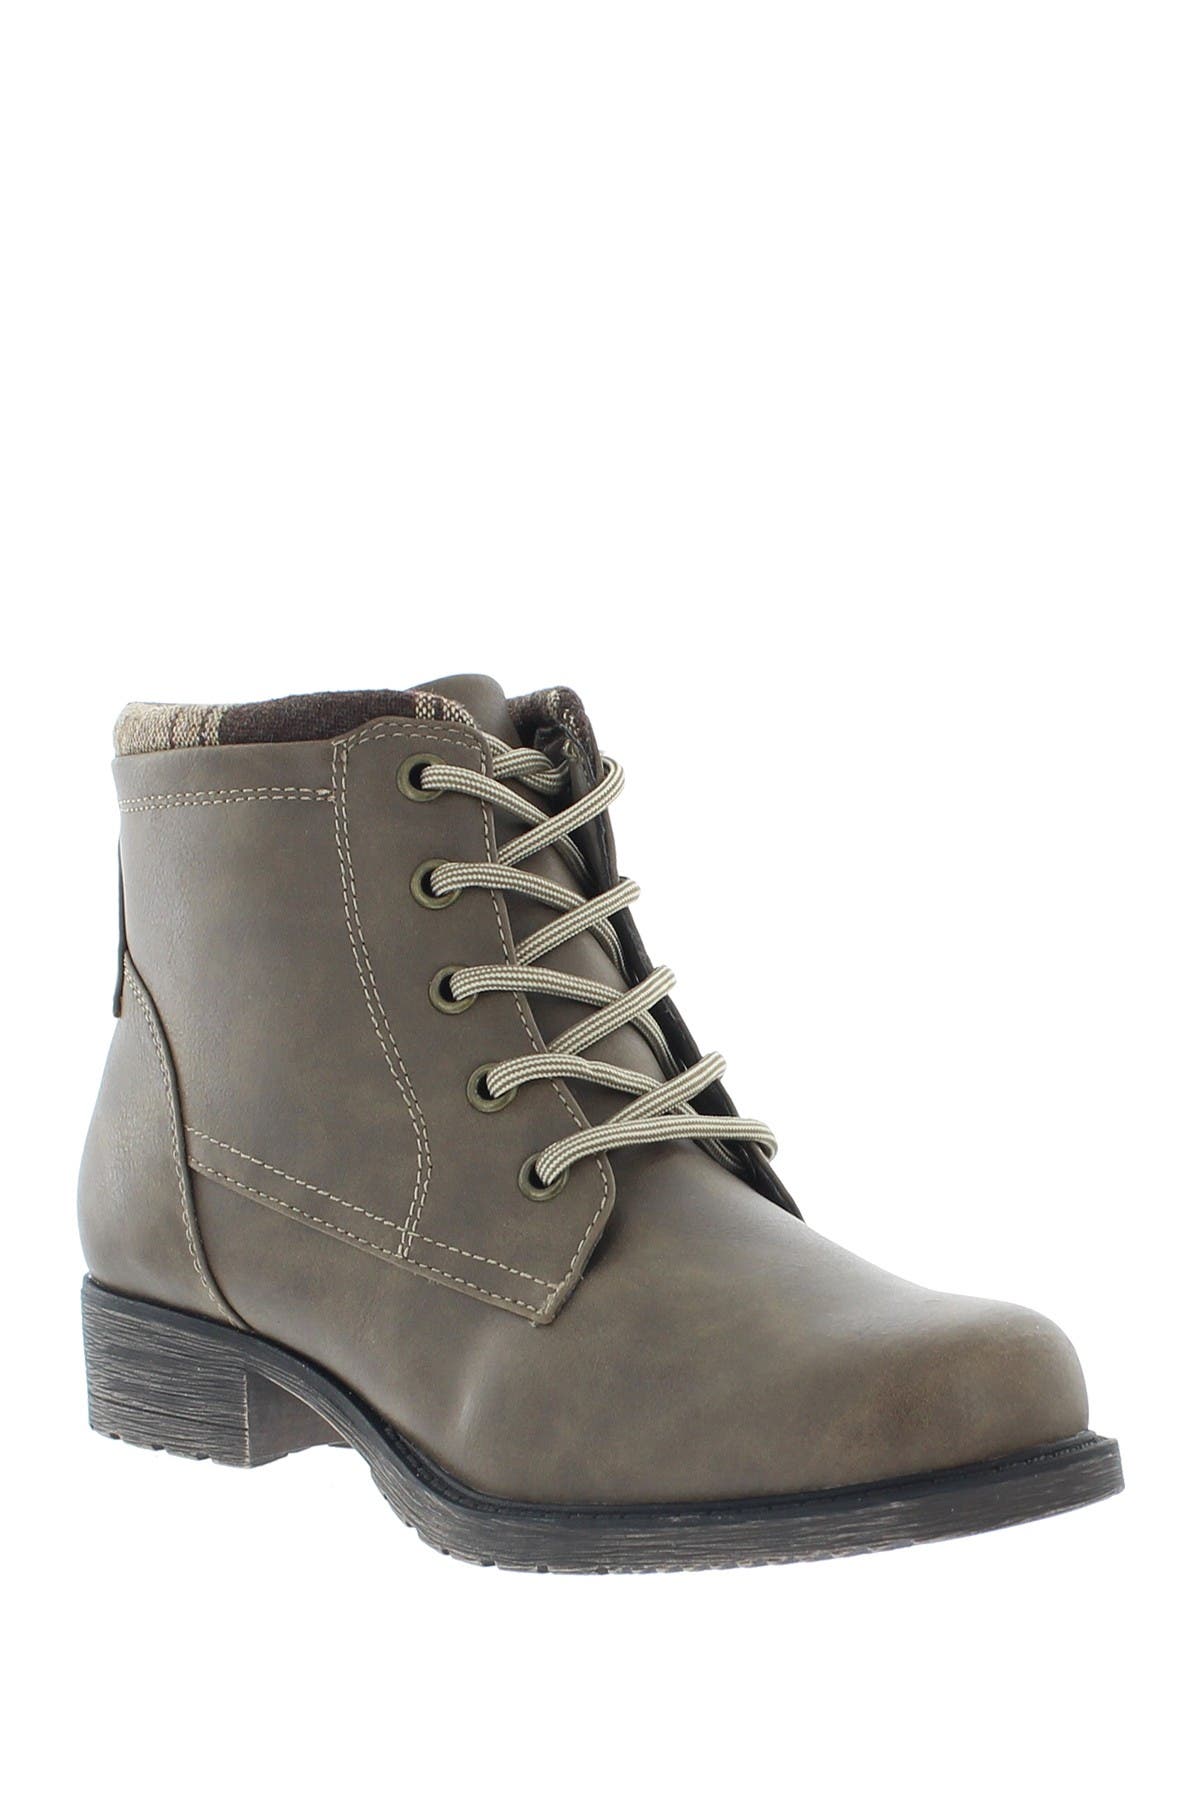 sporto lace up boots